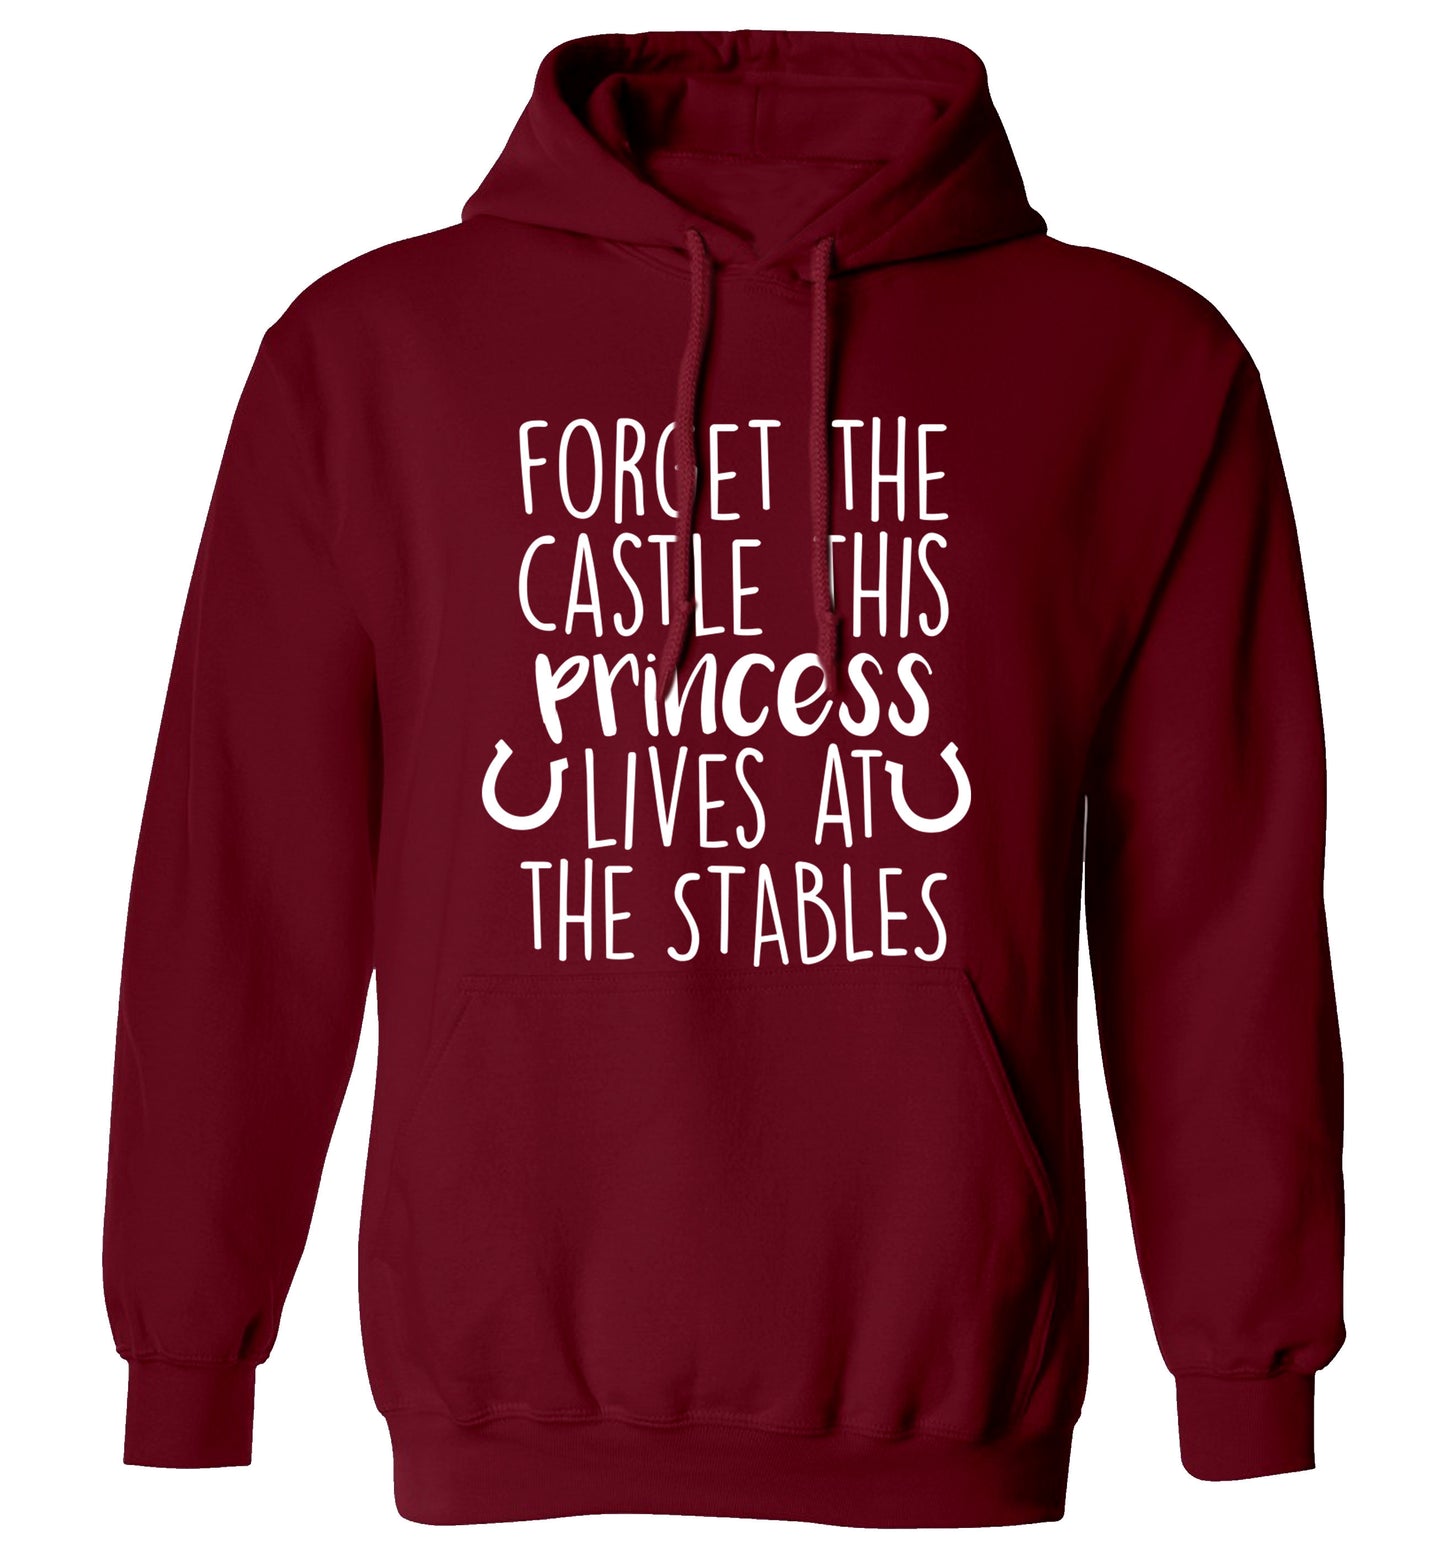 Forget the castle this princess lives at the stables adults unisex maroon hoodie 2XL